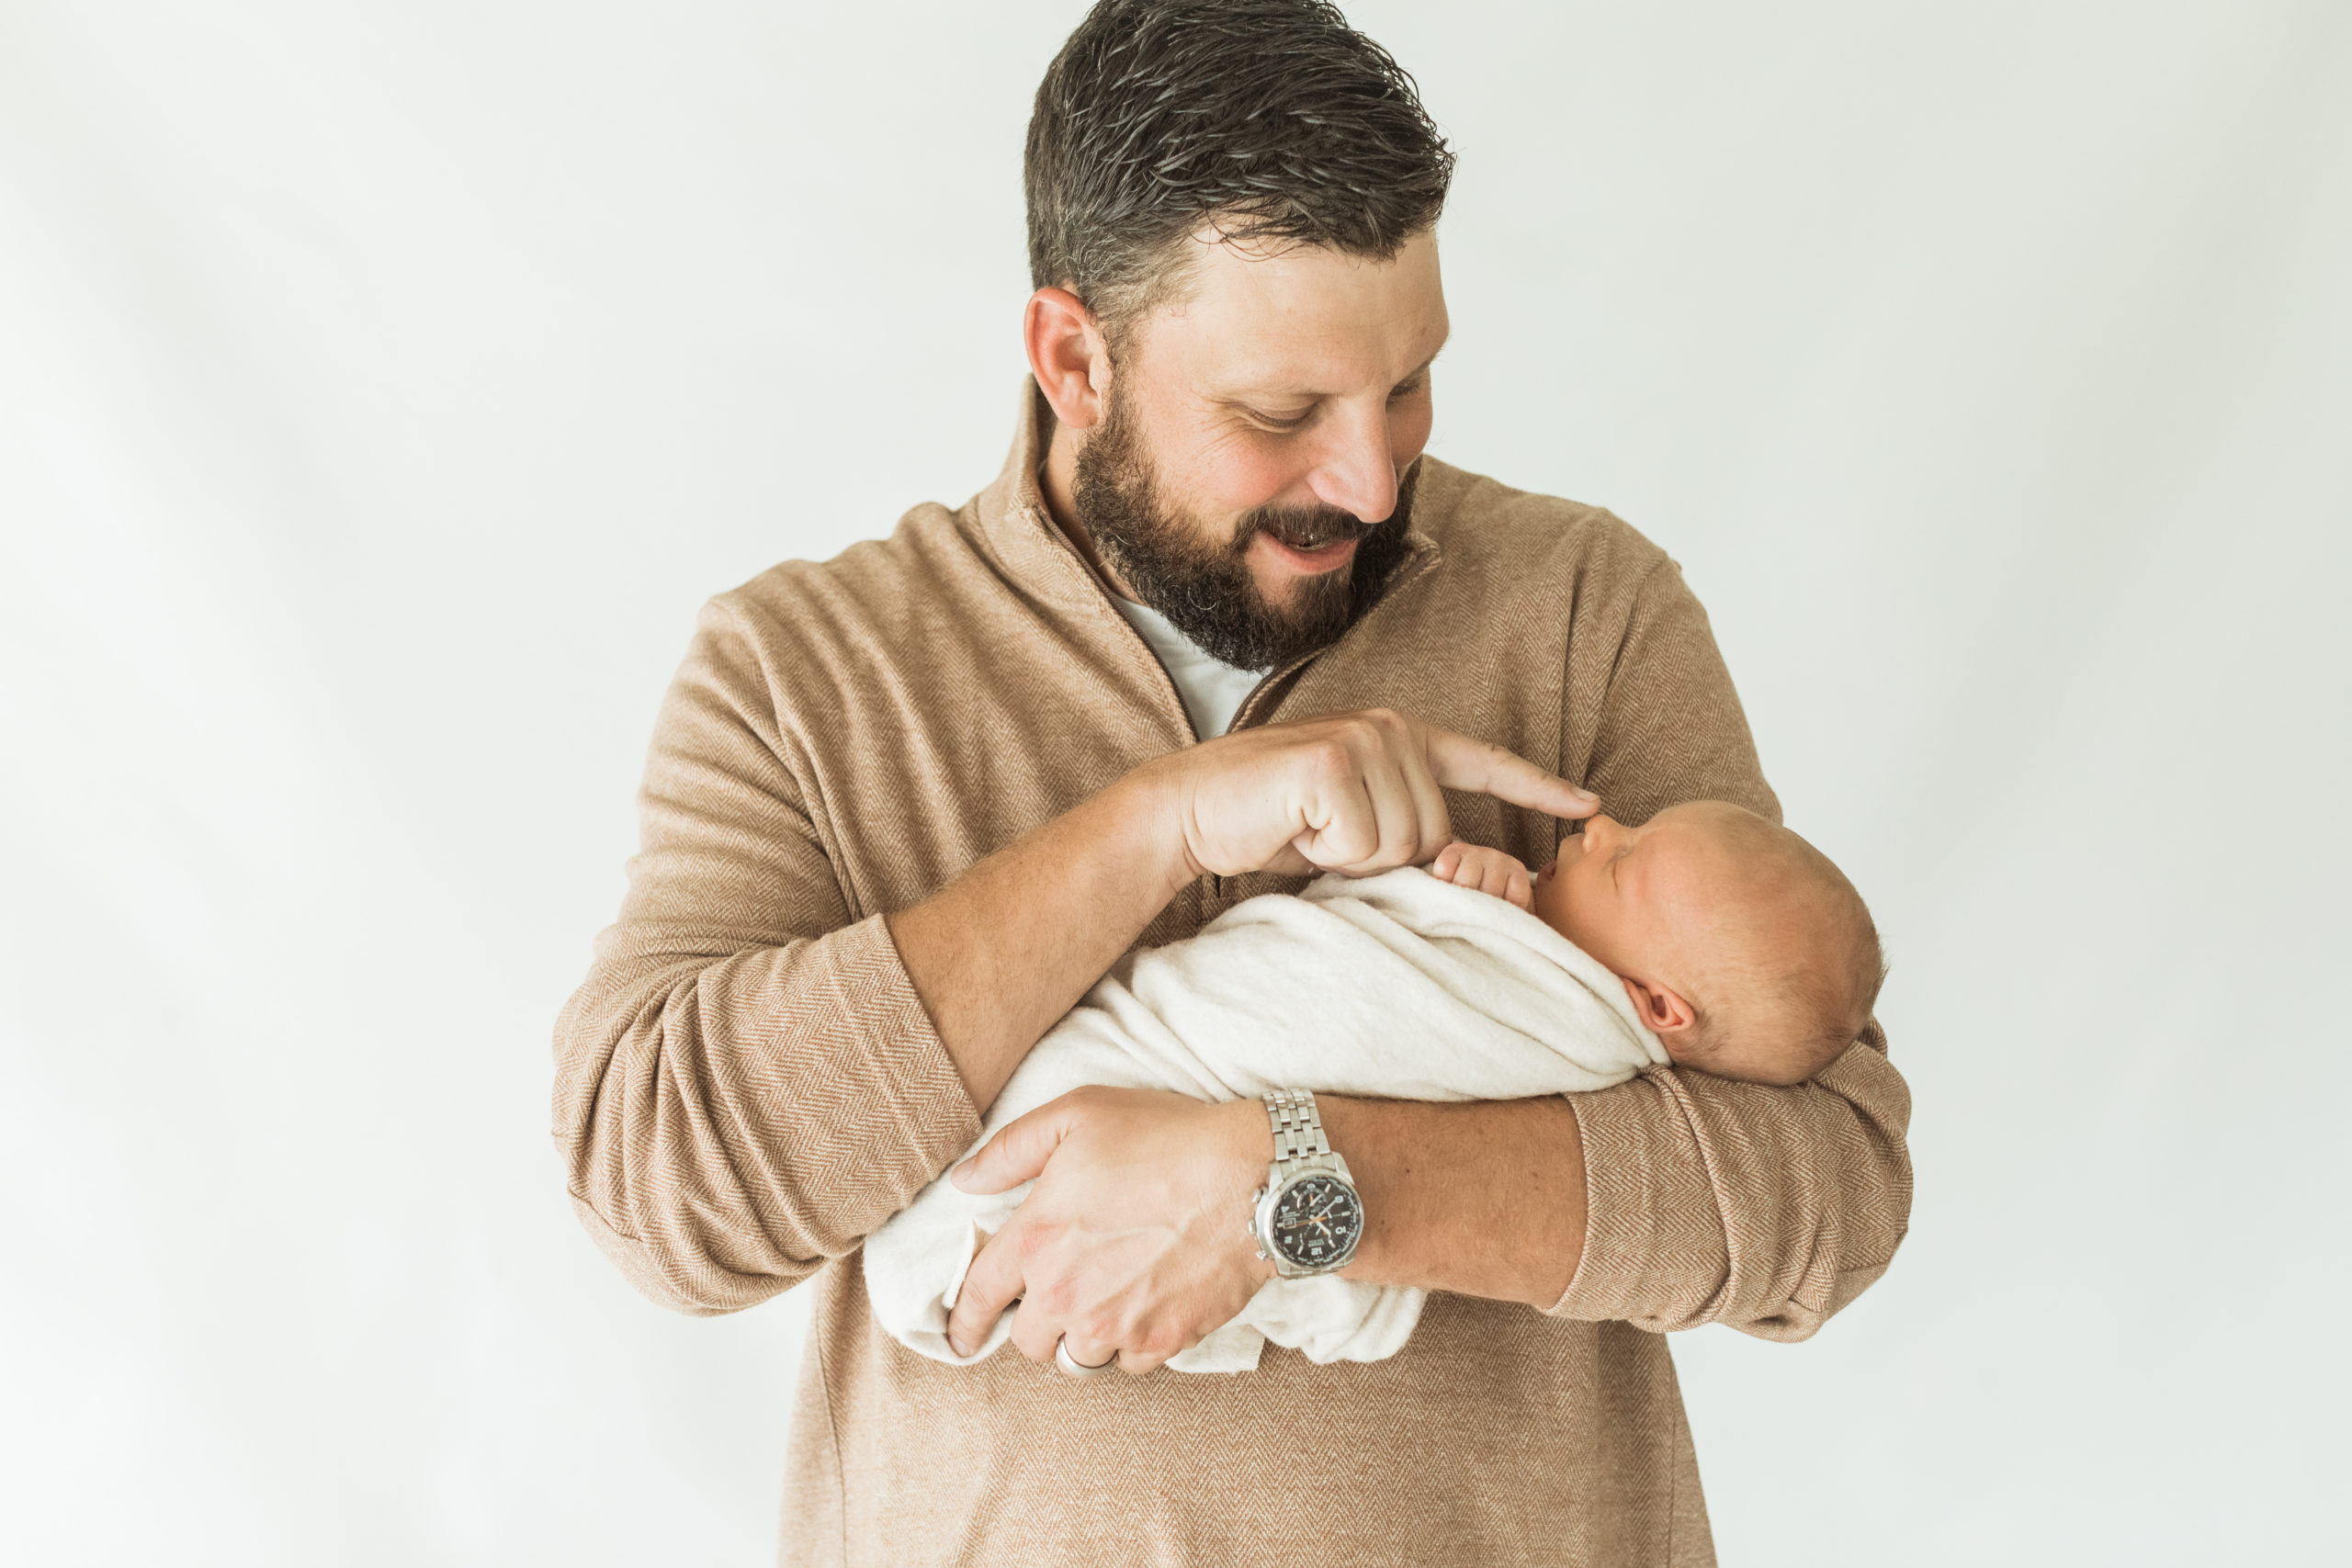 Dad holding his newborn baby boy in his arms. Baby wrapped in beige blanket. Dad touching baby's nose. Dad wearing tan sweater.